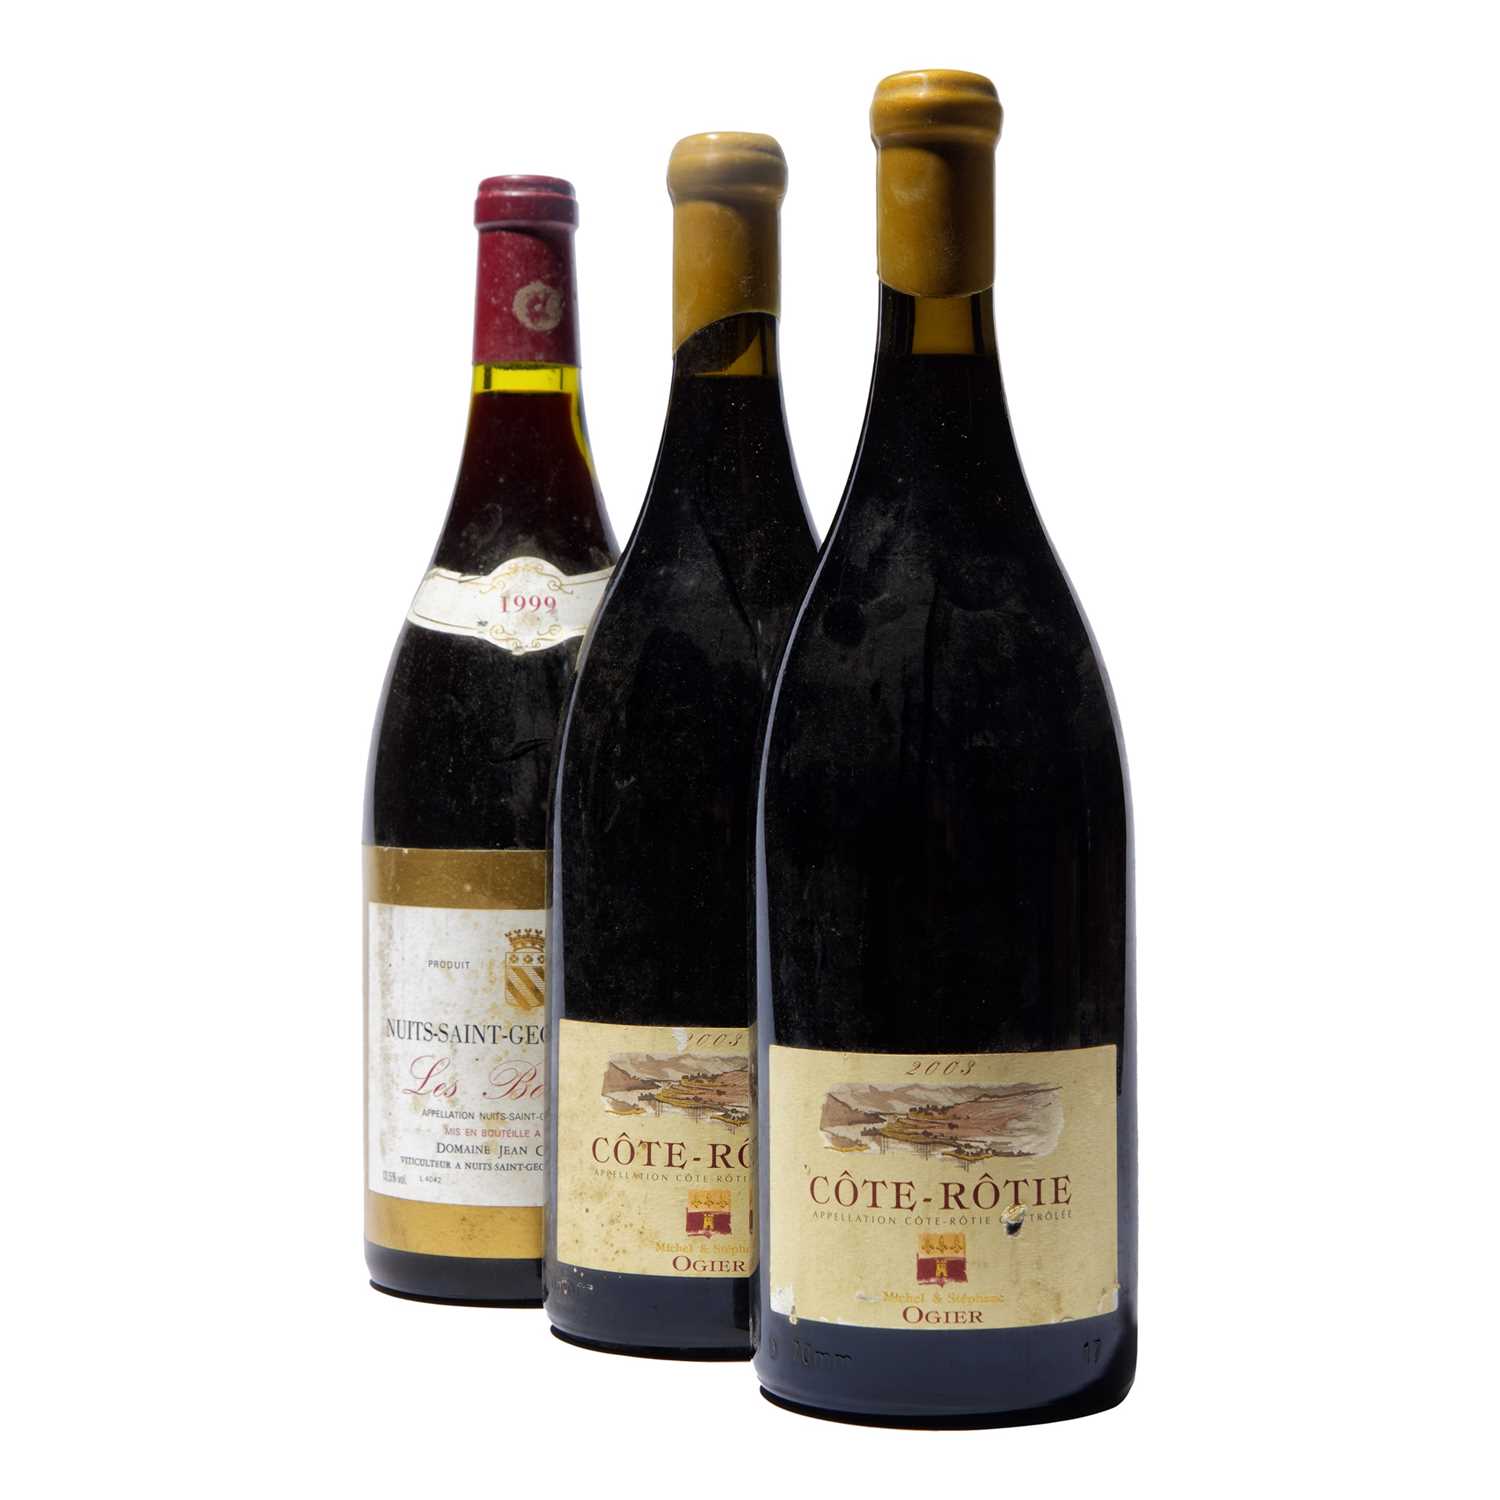 Lot 134 - 3 magnums Mixed Burgundy and Rhone